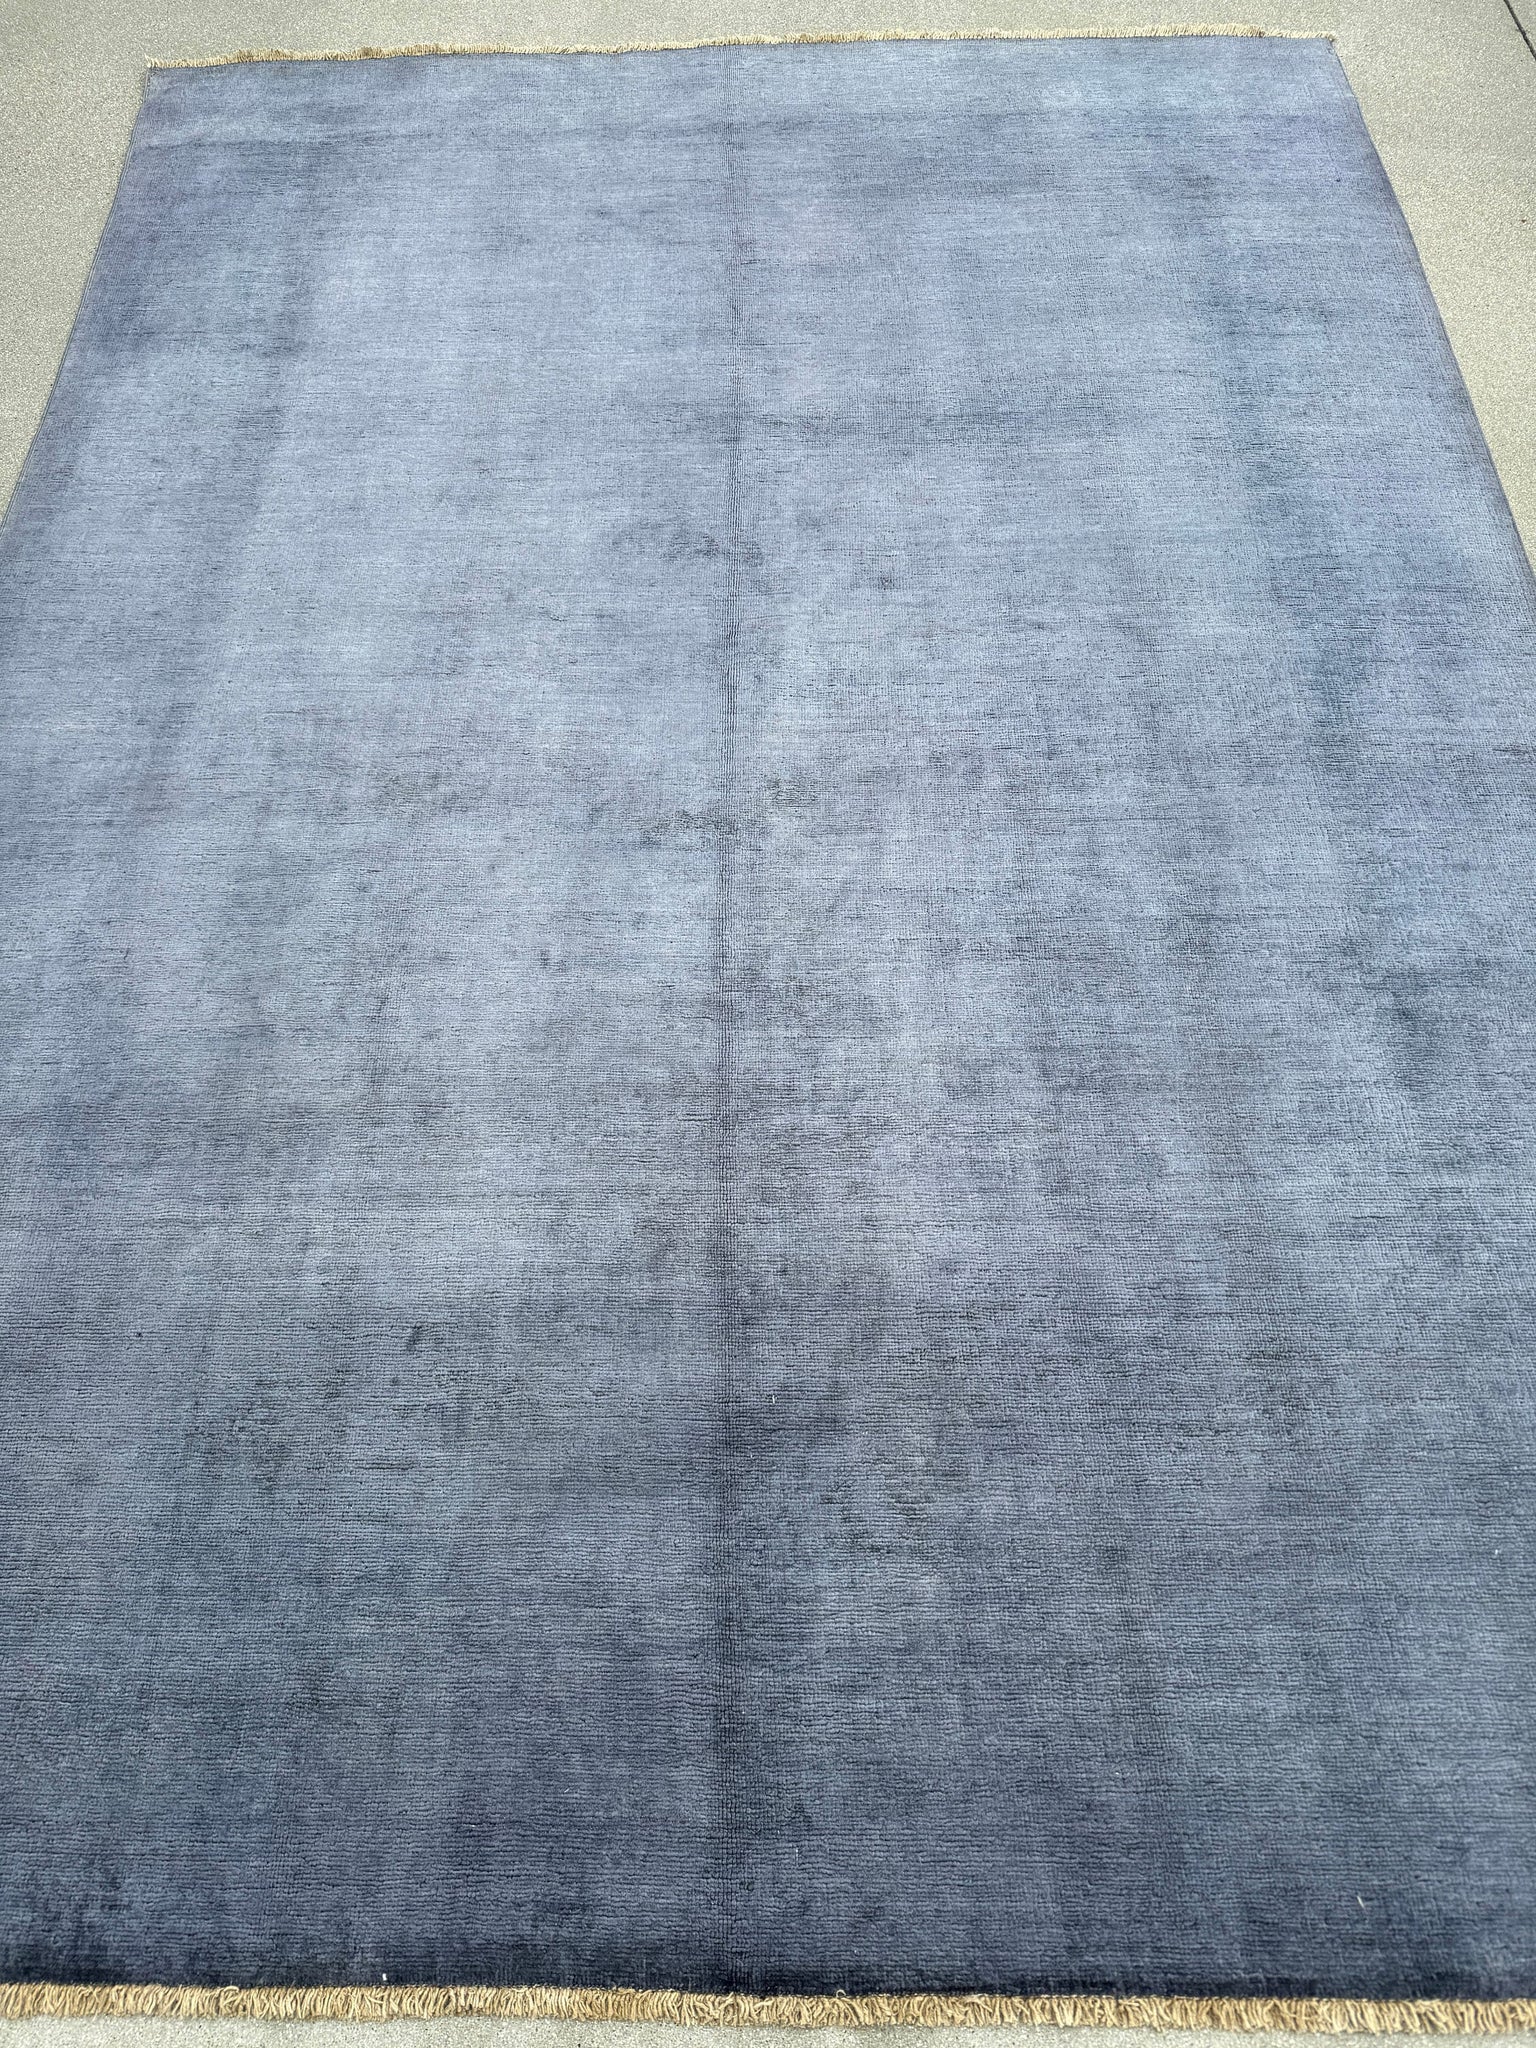 5-6x8 Handmade Afghan Rug | Prussian Denim Blue Cadet Grey Gray | Wool Hand Knotted Muted Solid